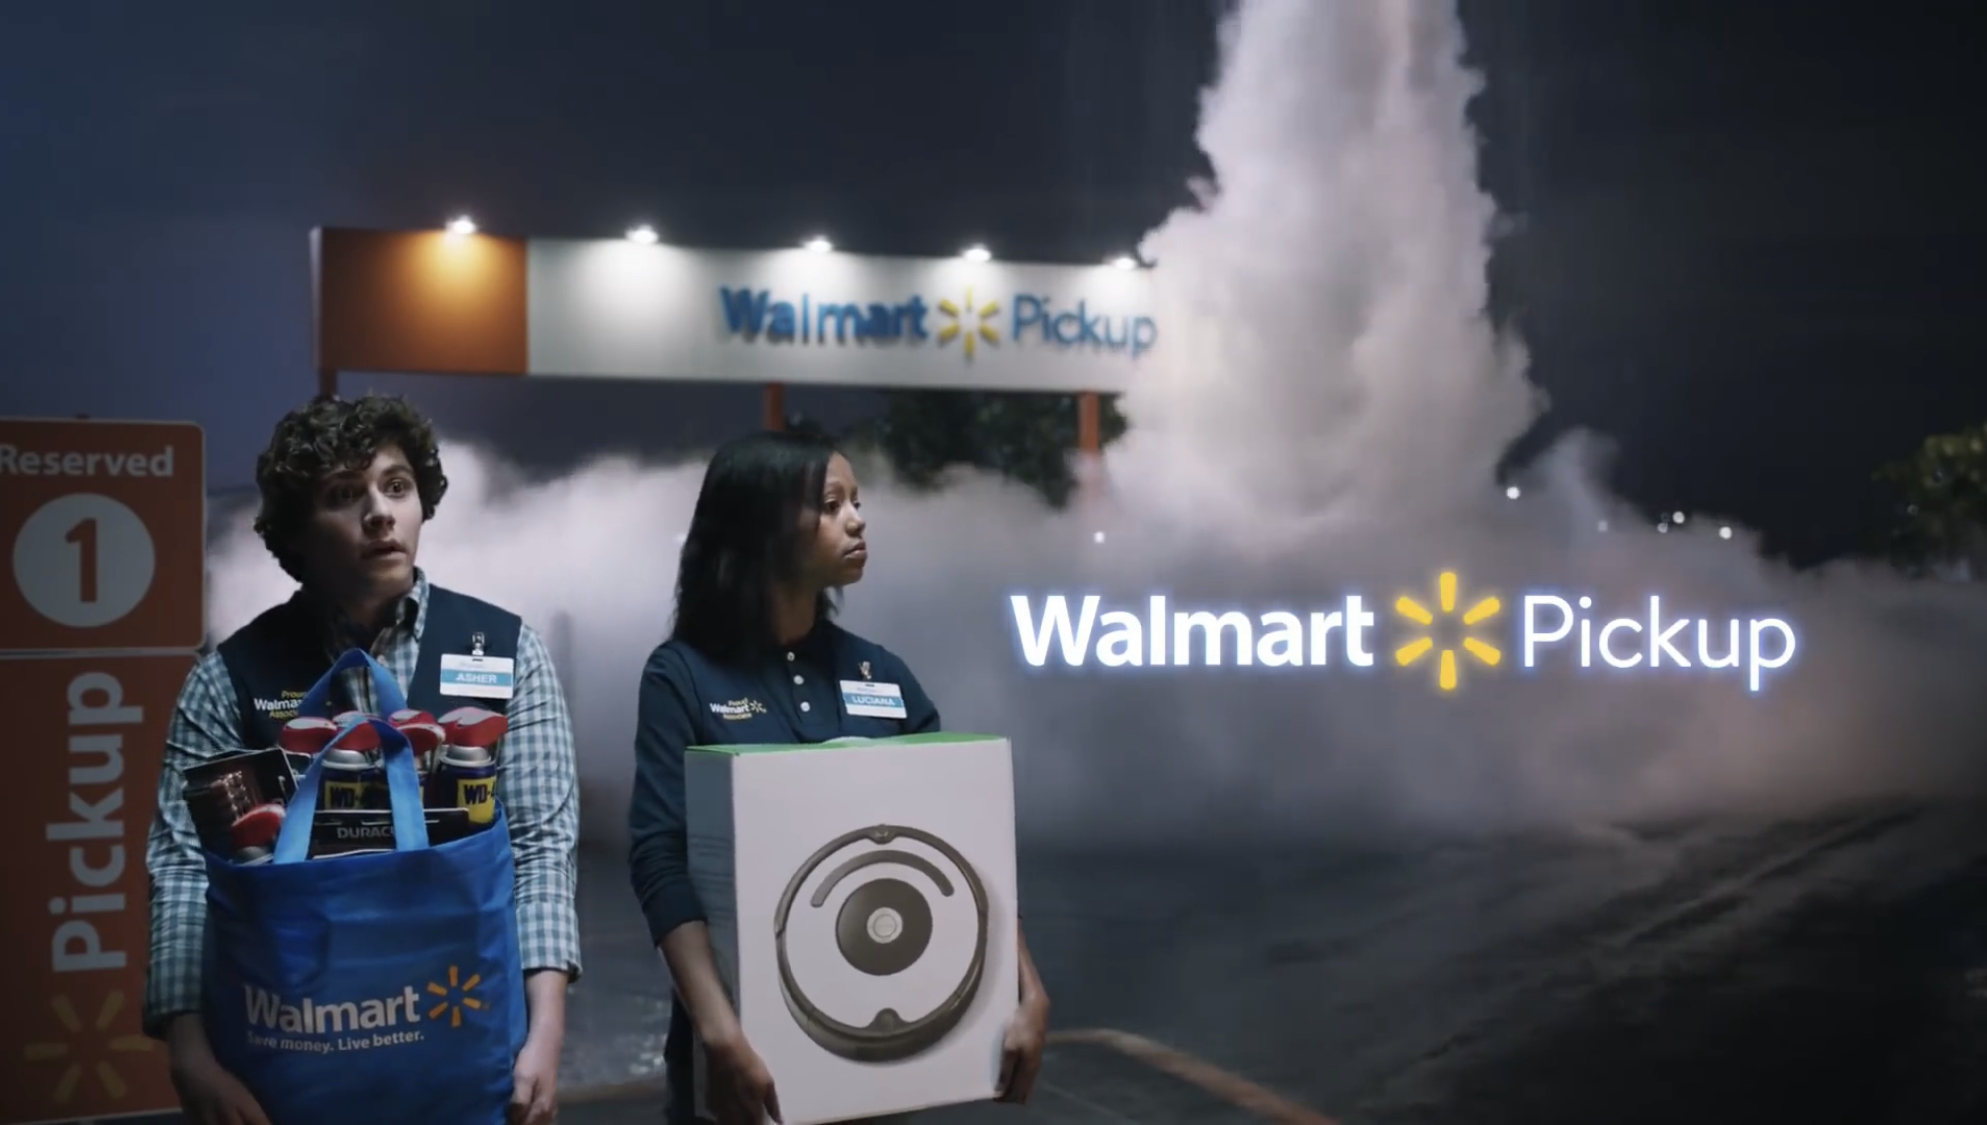 New Walmart Super Bowl Commercial Features Our Favorite Time and Space Travelers